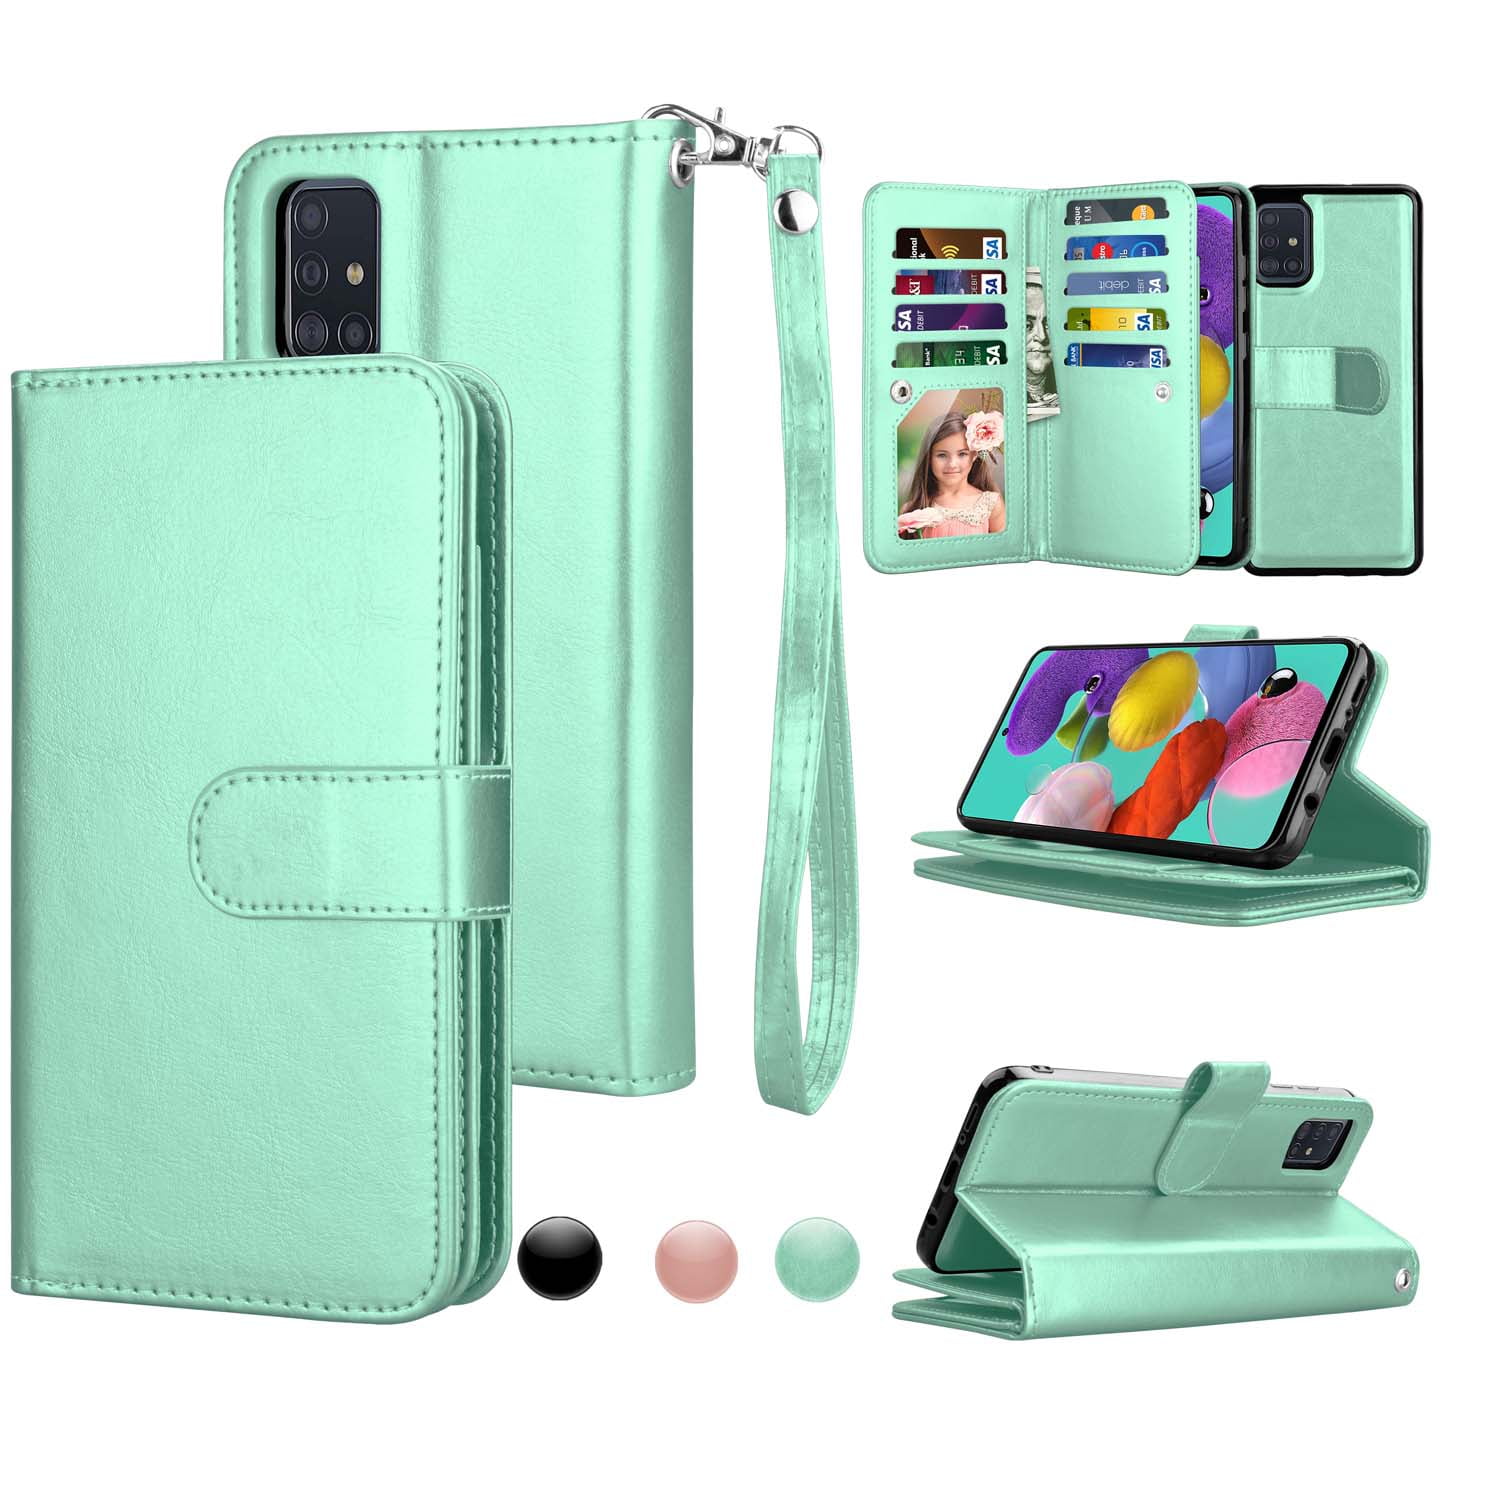 PU Leather Shockproof Notebook Wallet Butterfly Phone Case with Kickstand Card Slots Magnetic Soft TPU Bumper Flip Folio Protective Cover for Samsung Galaxy A71 black Samsung Galaxy A71 Case